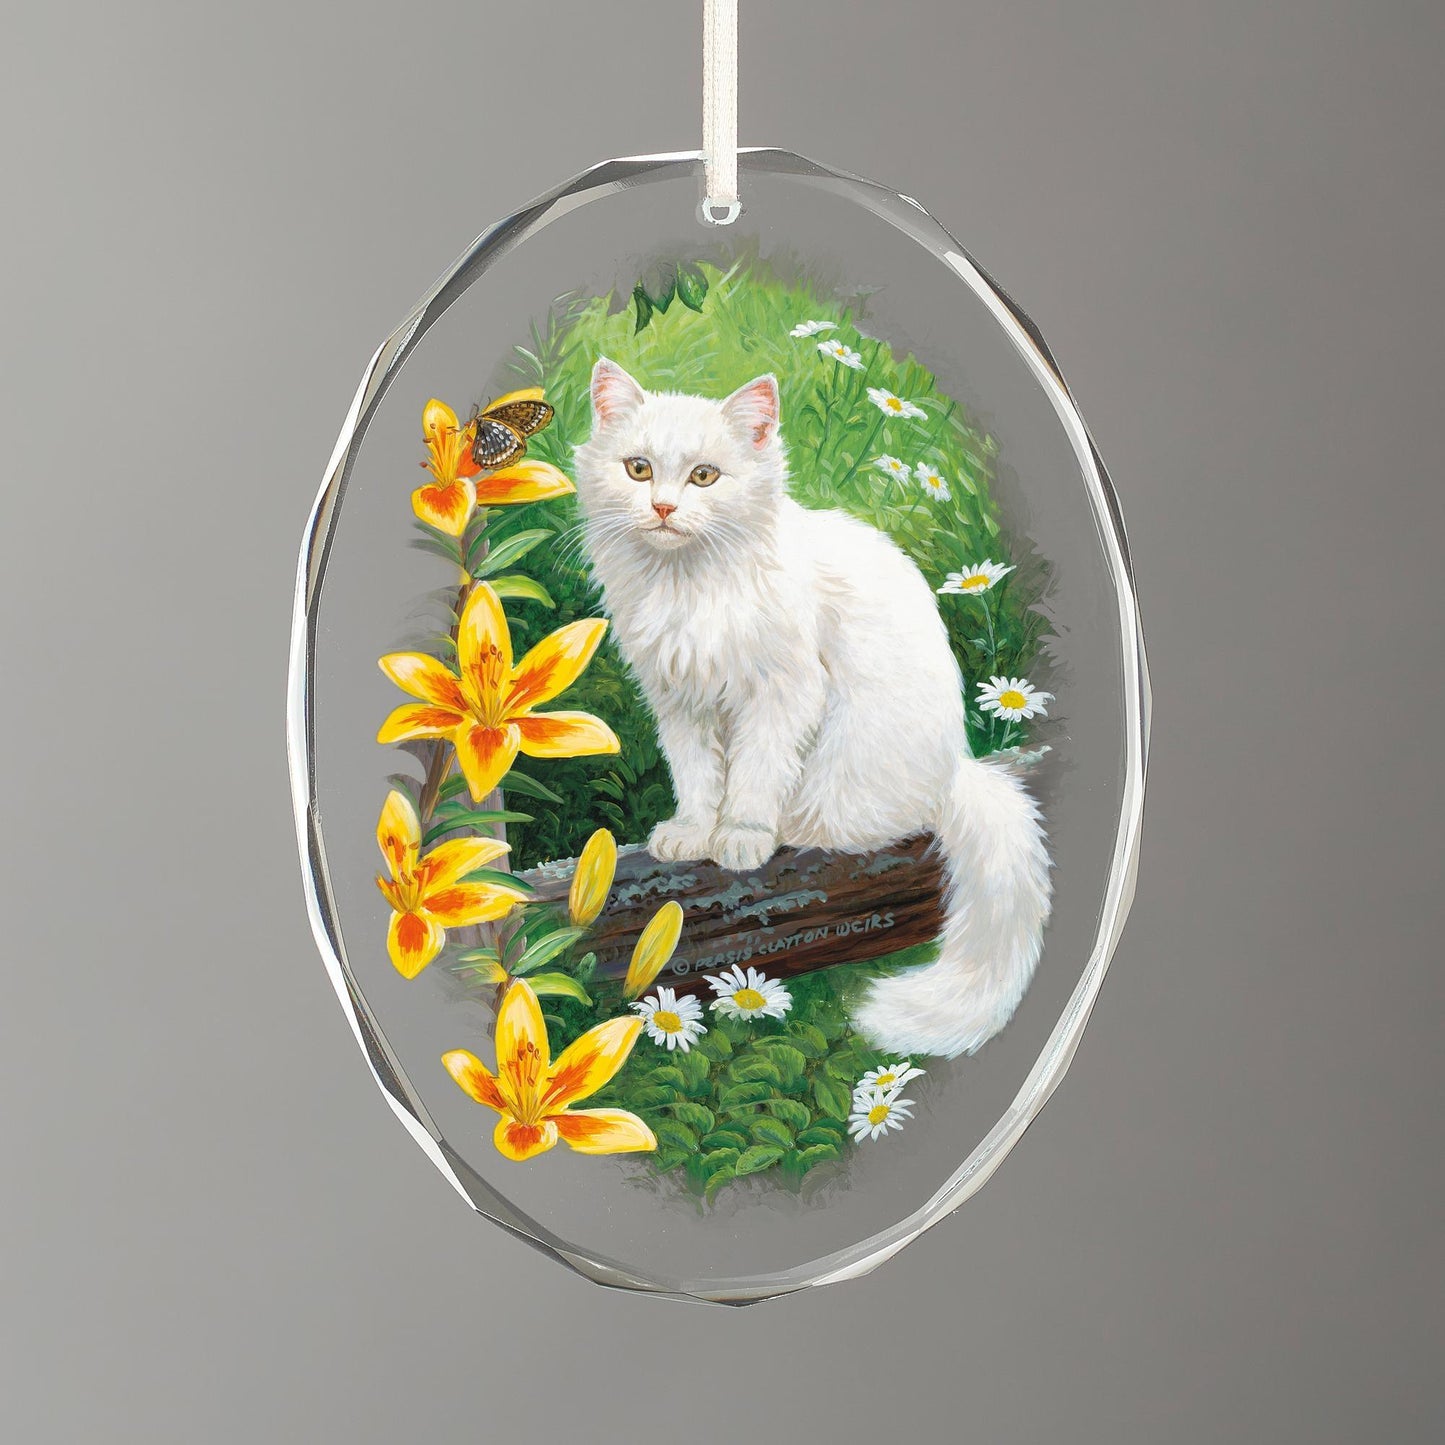 Nature Study—Cat Oval Glass Ornament - Wild Wings